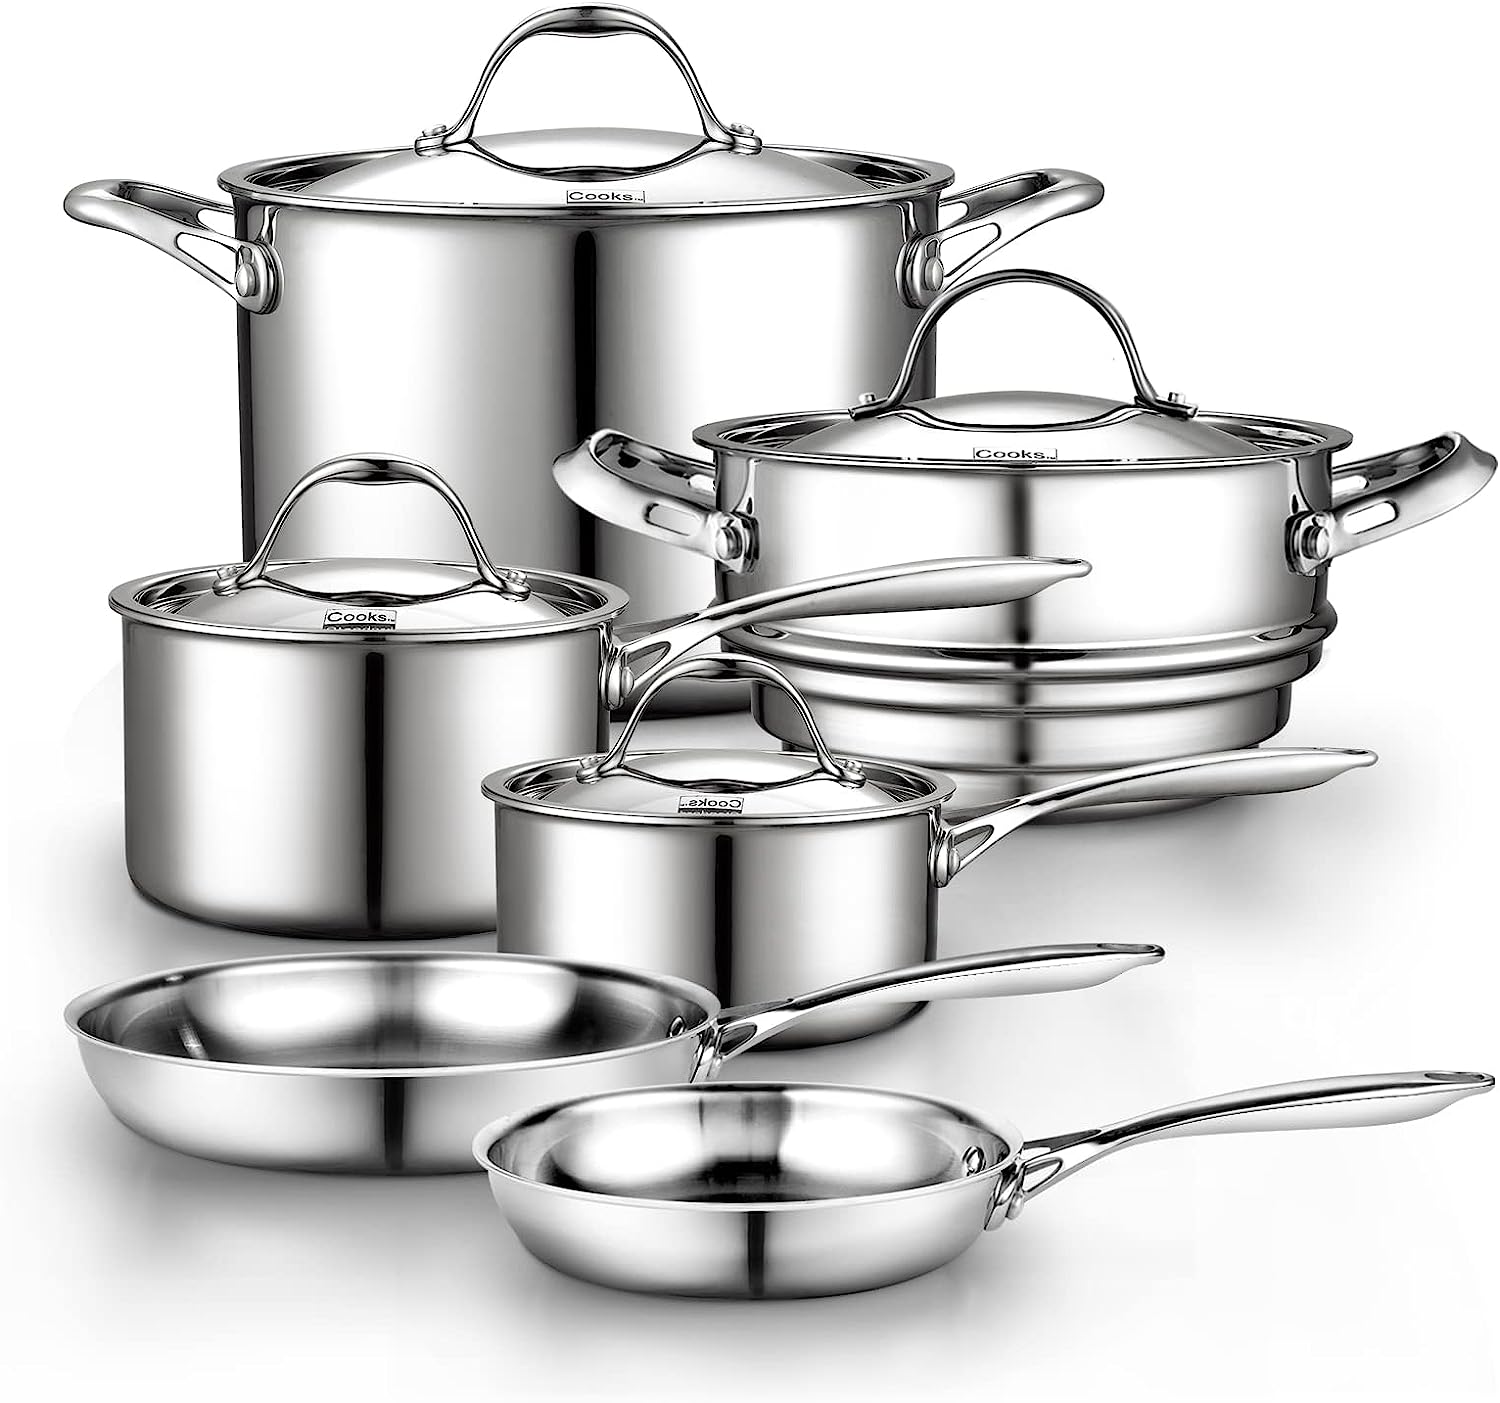 Cooks Standard Stainless Steel Kitchen Cookware Sets 10-Piece, Multi-Ply Full Clad Pots and Pans Cooking Set with Stay-Cool Handles, Dishwasher Safe, Oven Safe 500°F, Silver